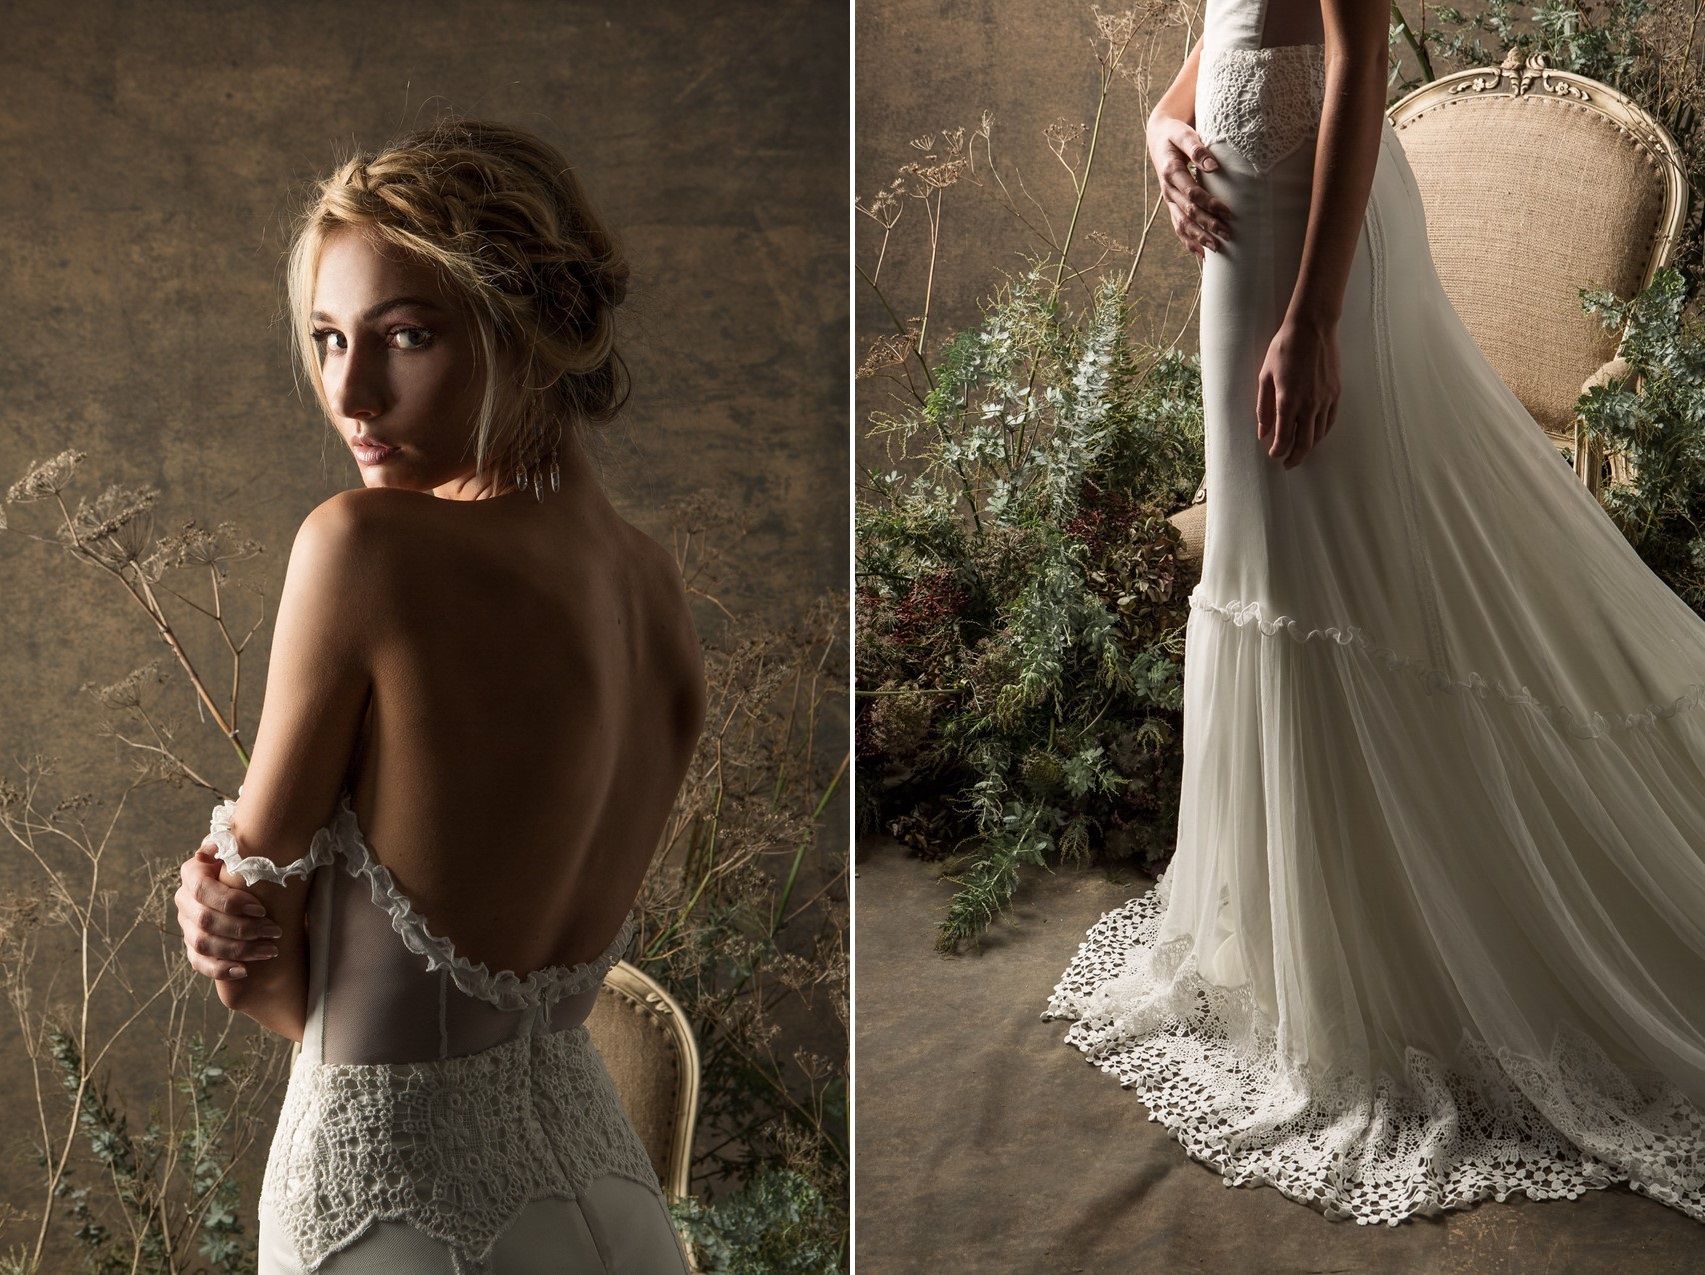 Stunning Strapless Wedding Dress from Dreamers & Lovers